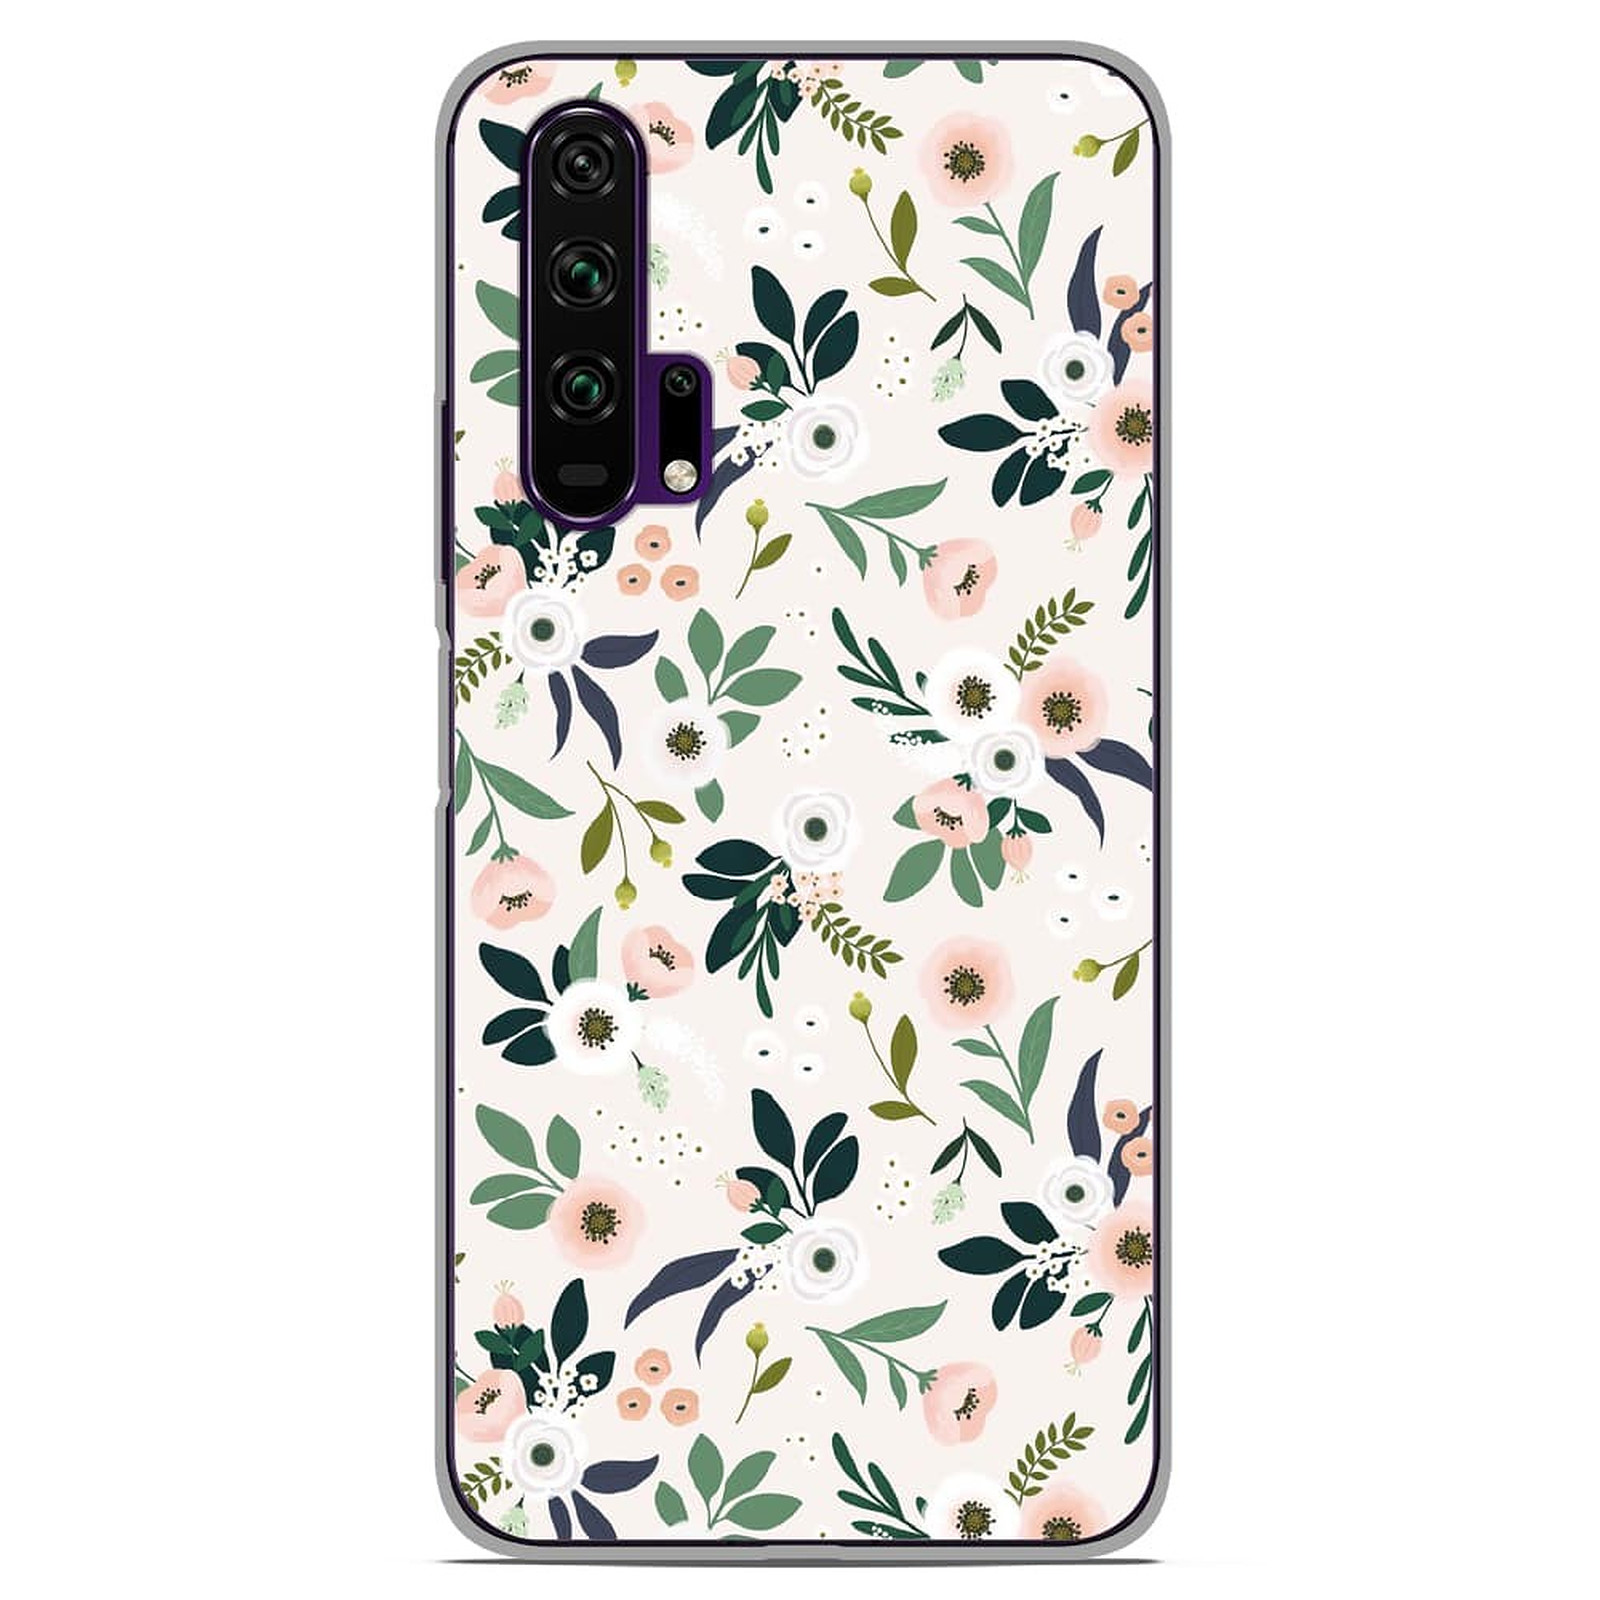 1001 Coques Coque silicone gel Huawei Honor 20 Pro motif Flowers - Coque telephone 1001Coques